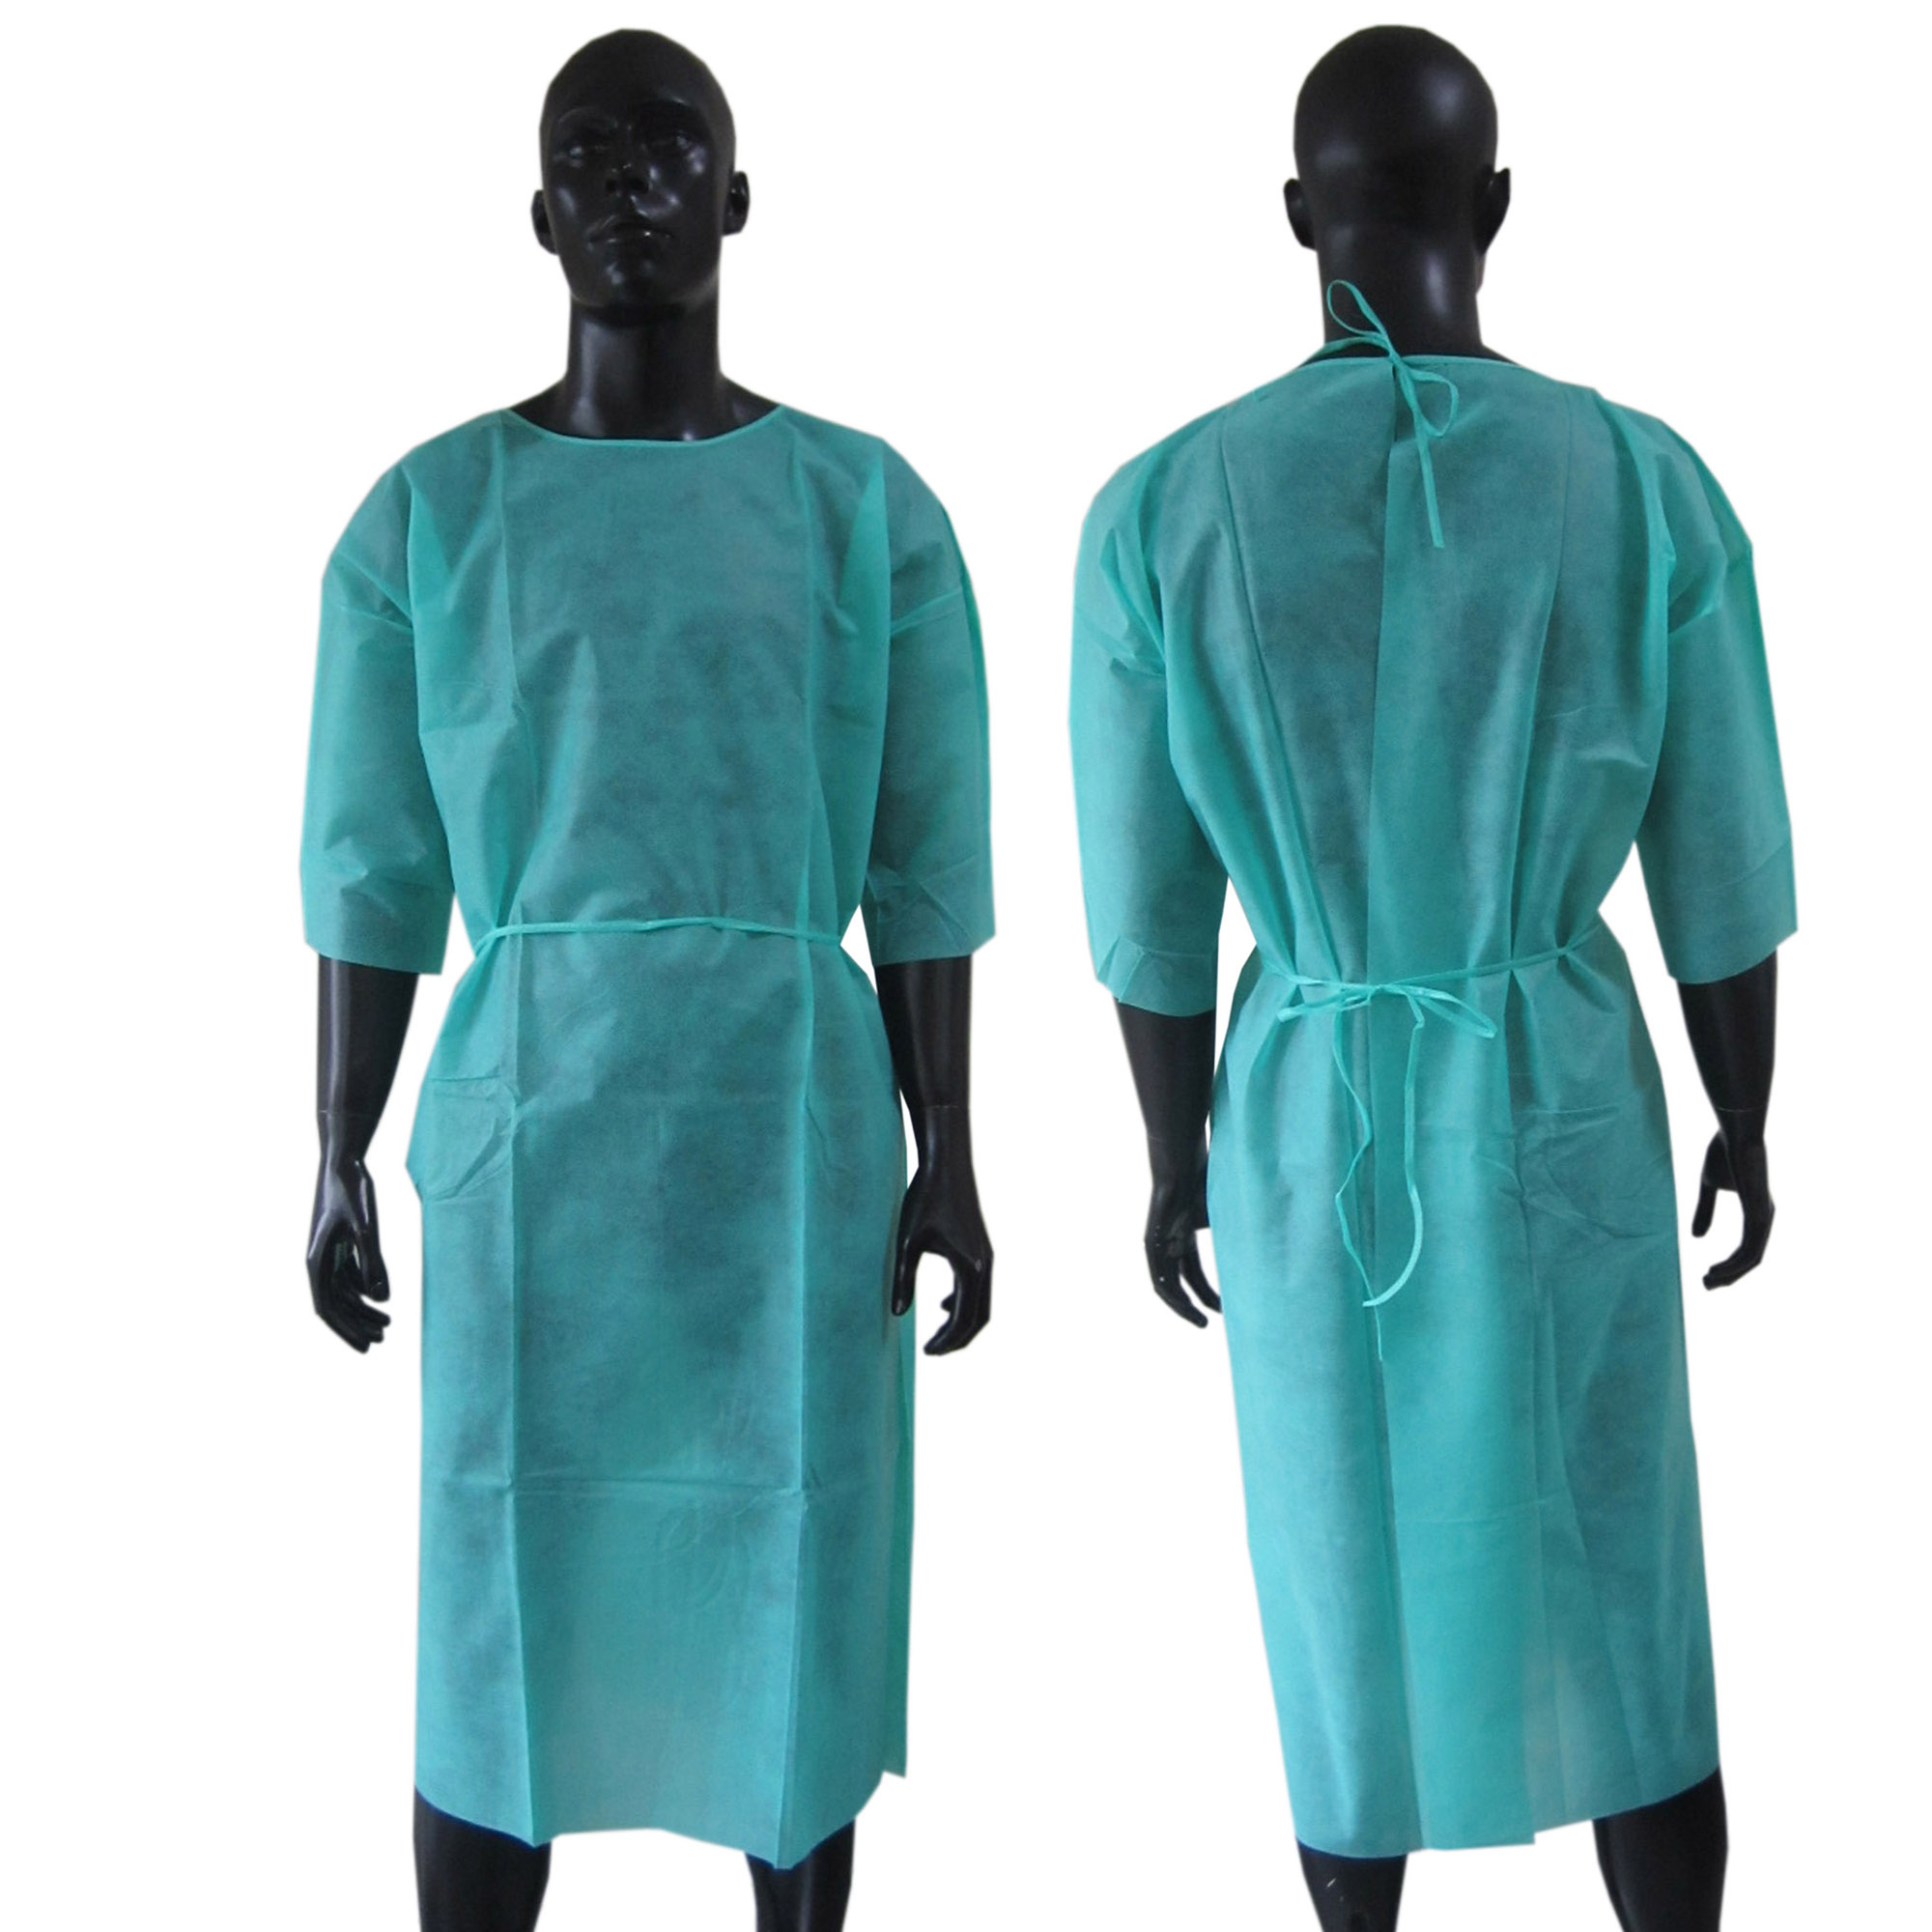 Disposable Medical Isolation Gown with Short Sleeves